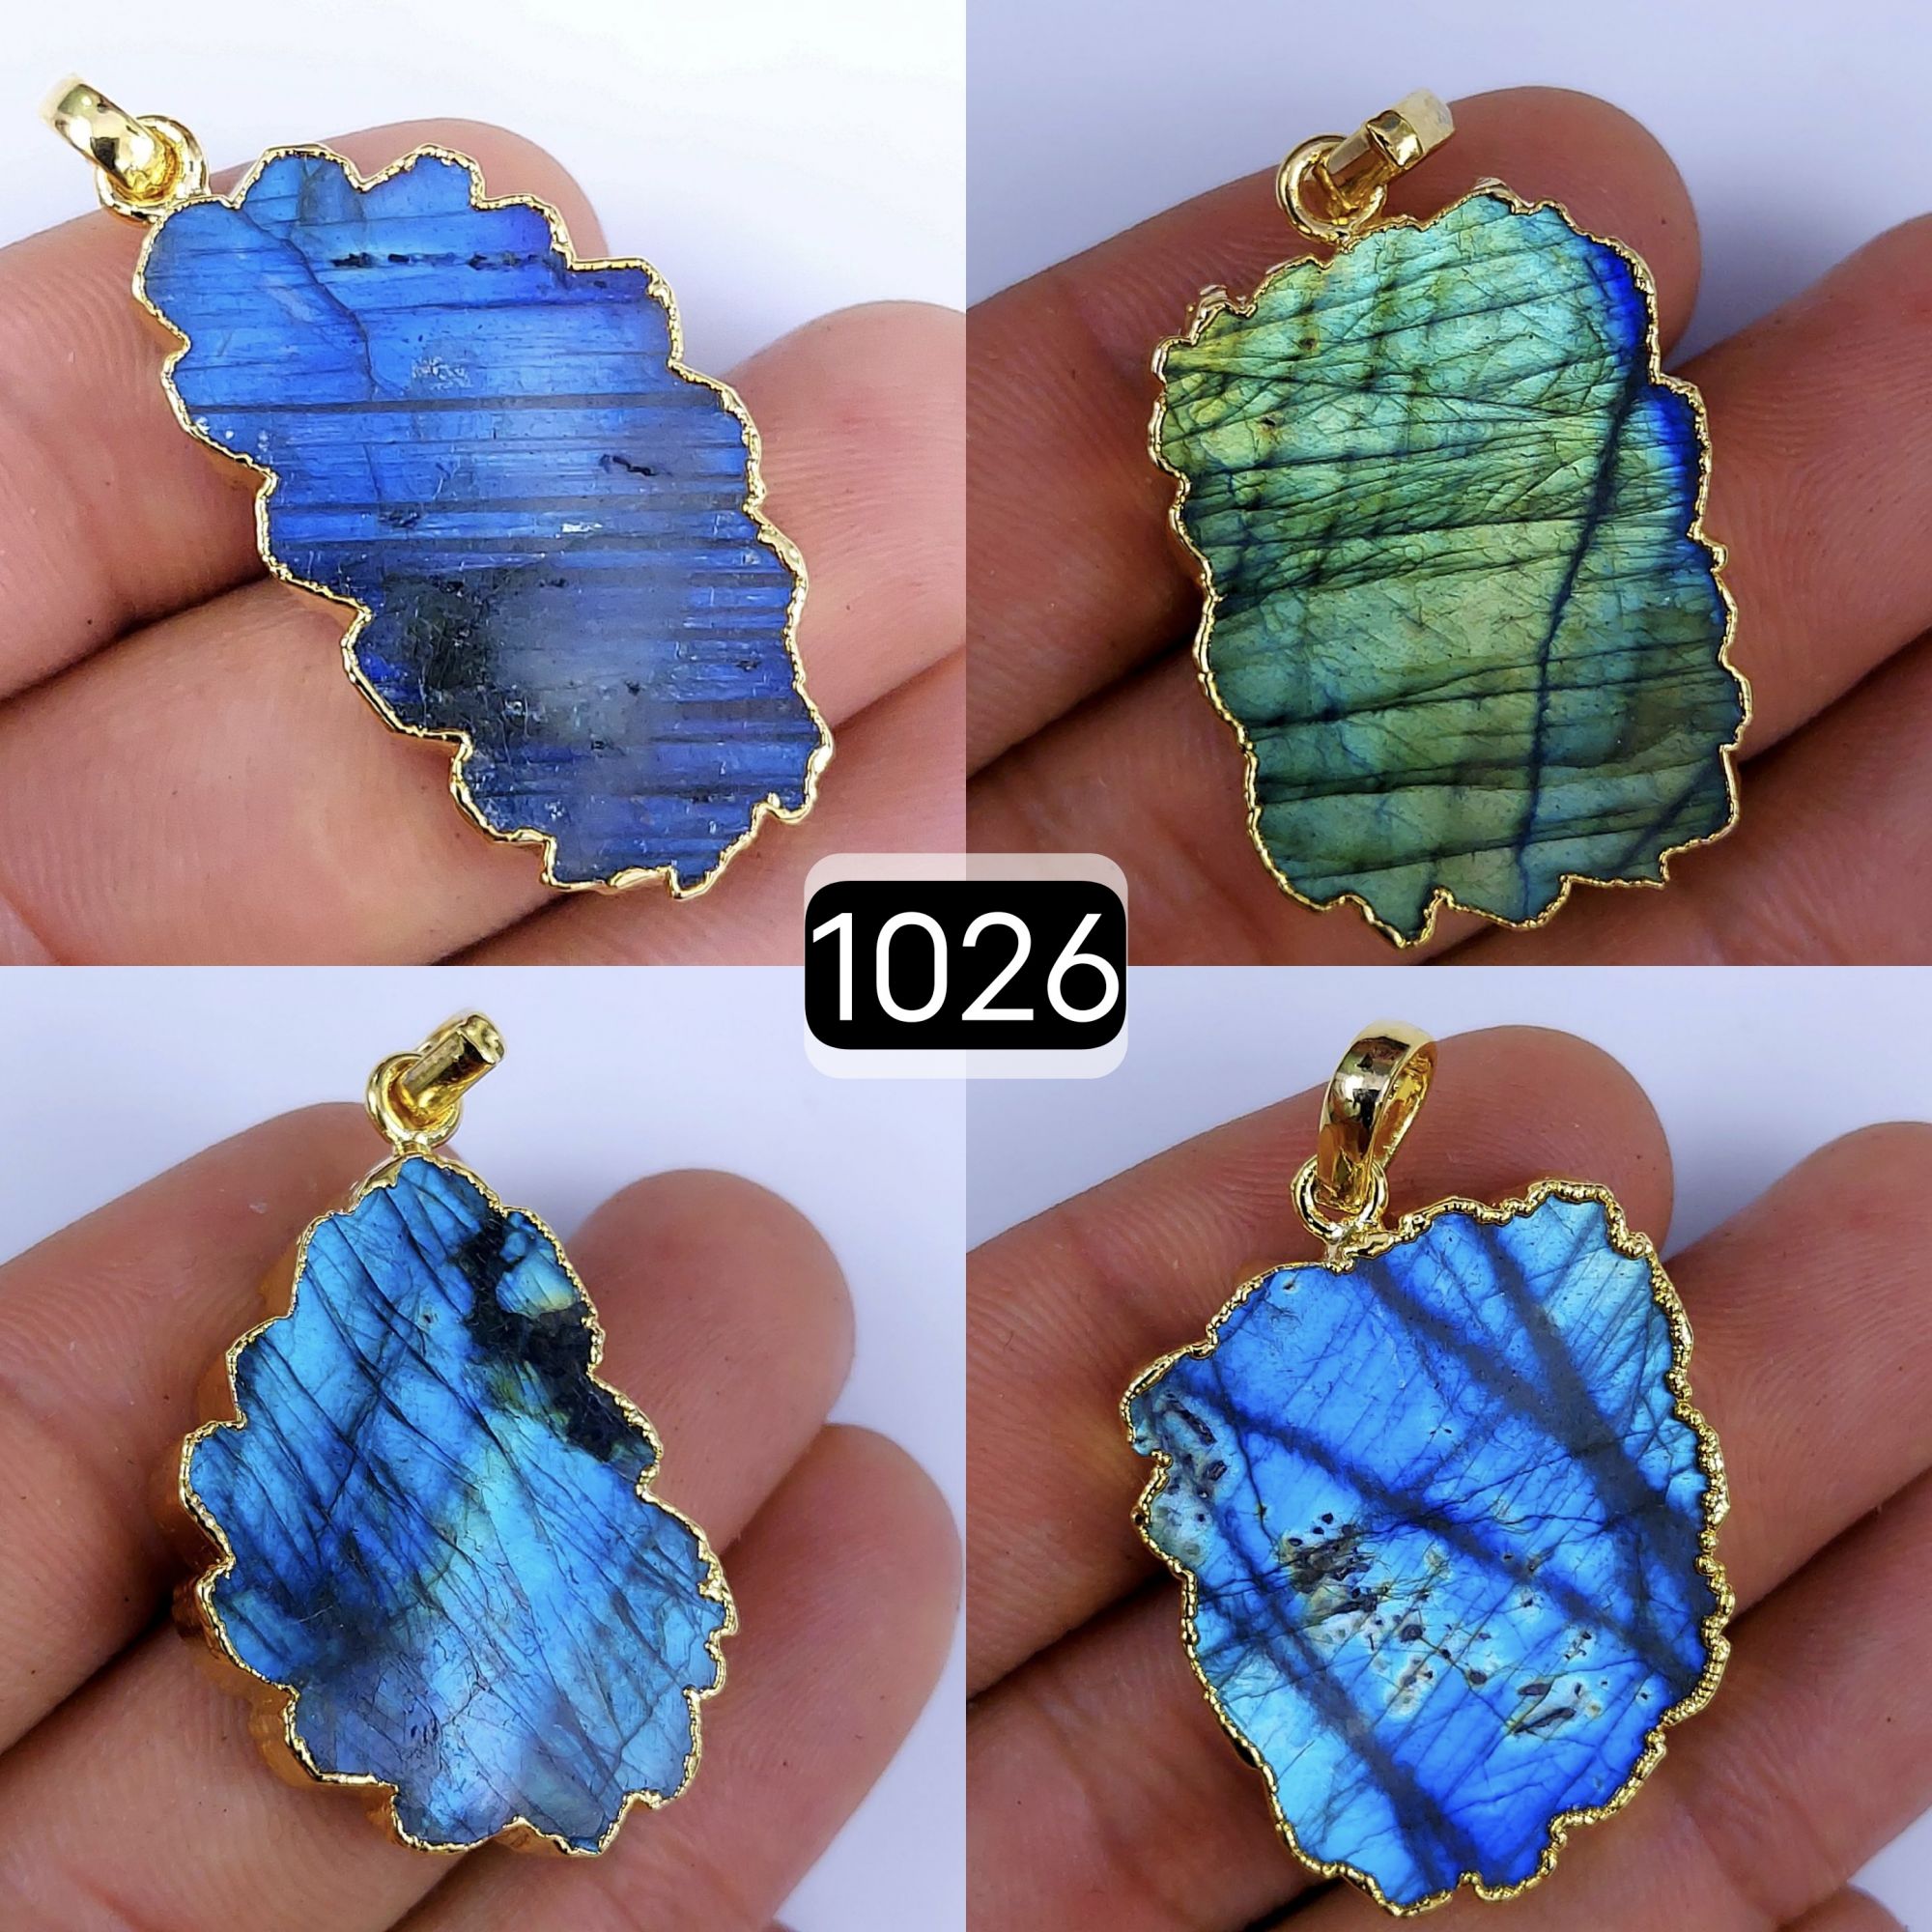 179Cts Natural Blue Labradorite Gold Electroplated Slice Pendant 32x18 22x12mm#1026